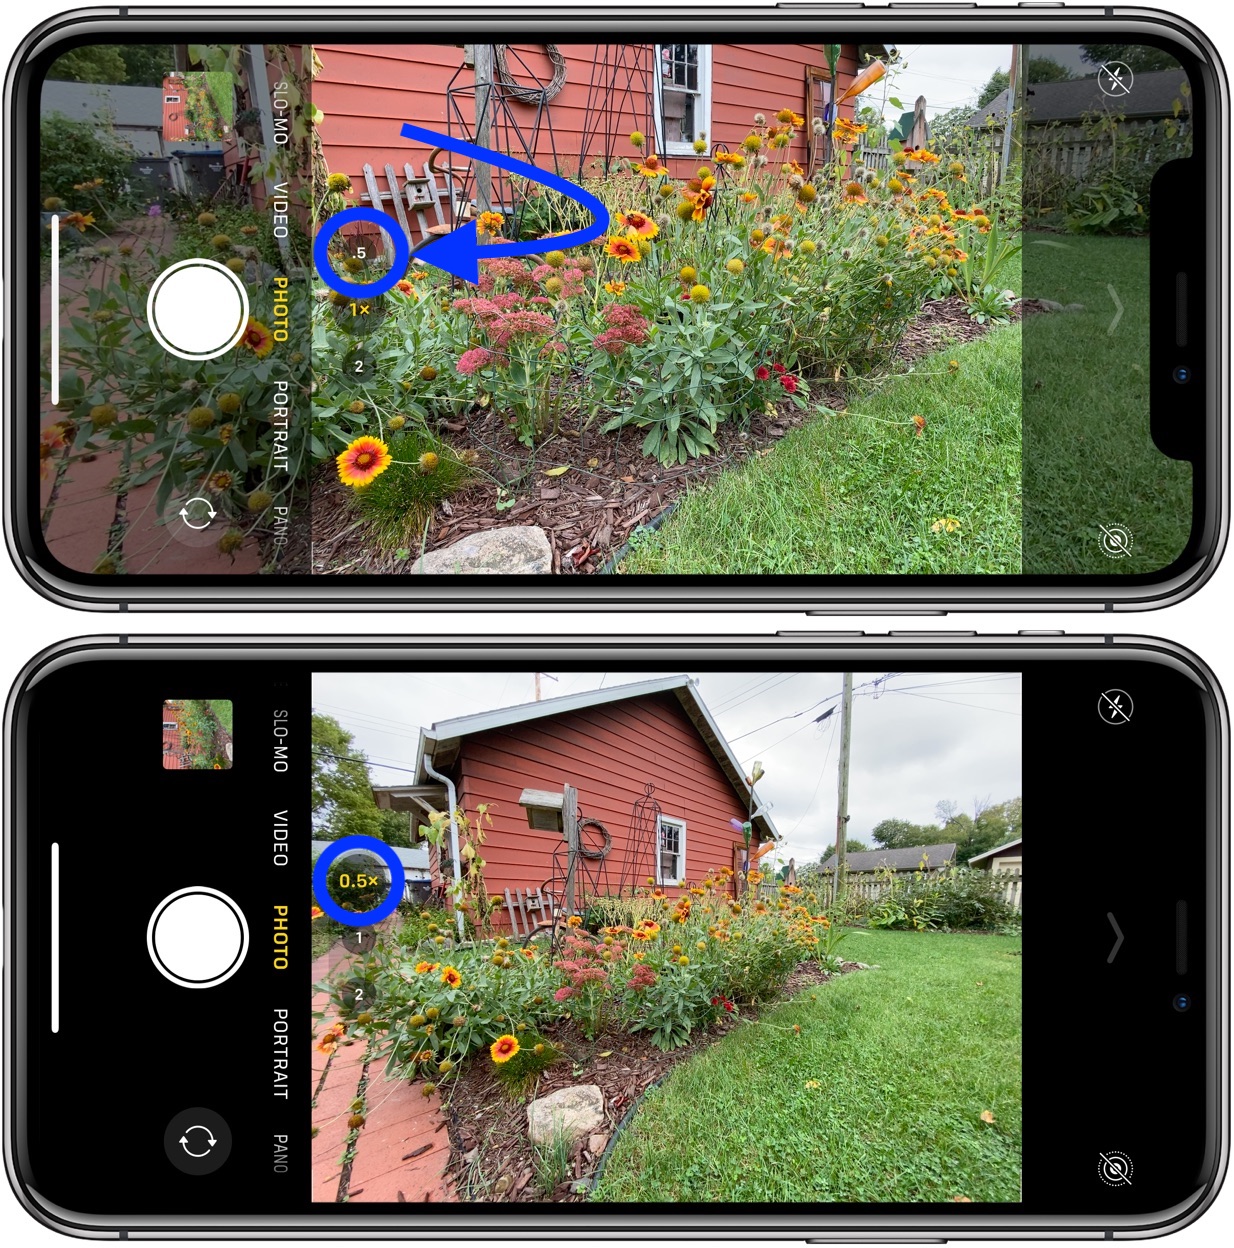 How to use ultra wide camera iPhone 11 and iPhone 11 Pro walkthrough 1